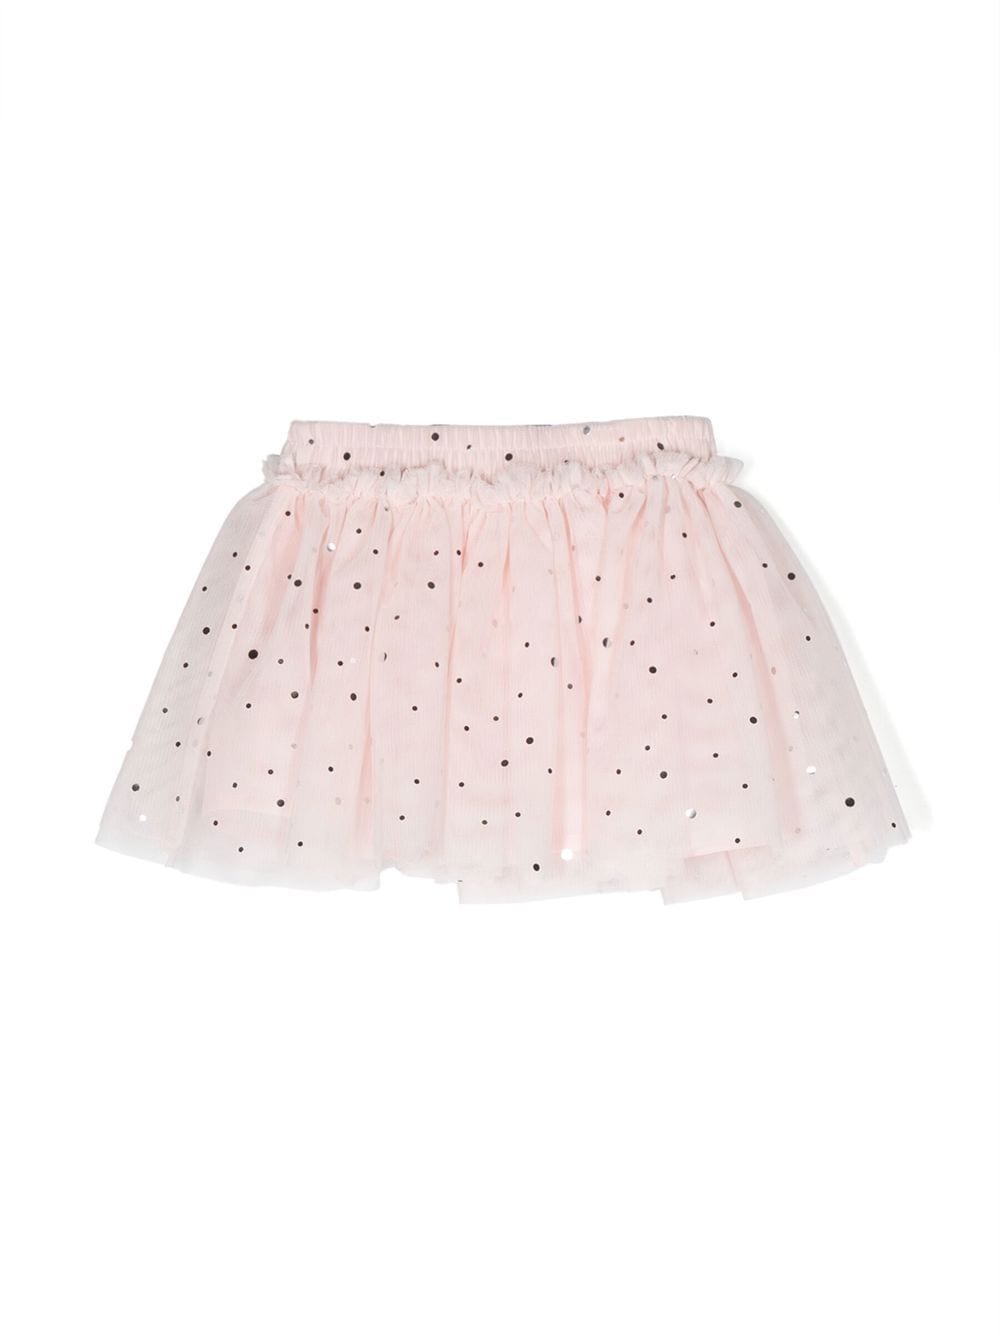 Tutu style skirt with sequins